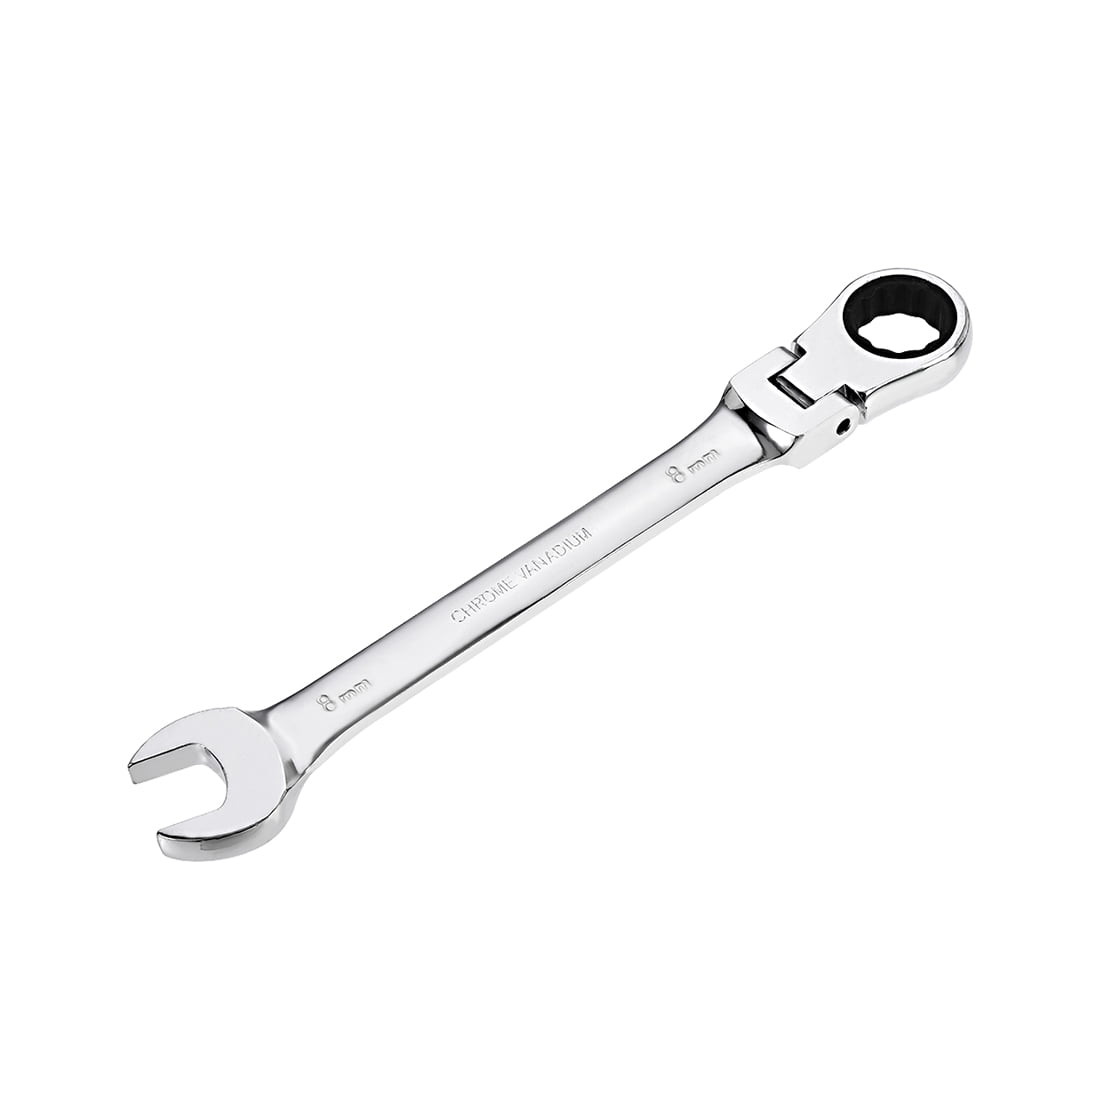 LANG USA Offset Ratchet Ratcheting Box Combination Wrench Metric 19mm x 21mm 